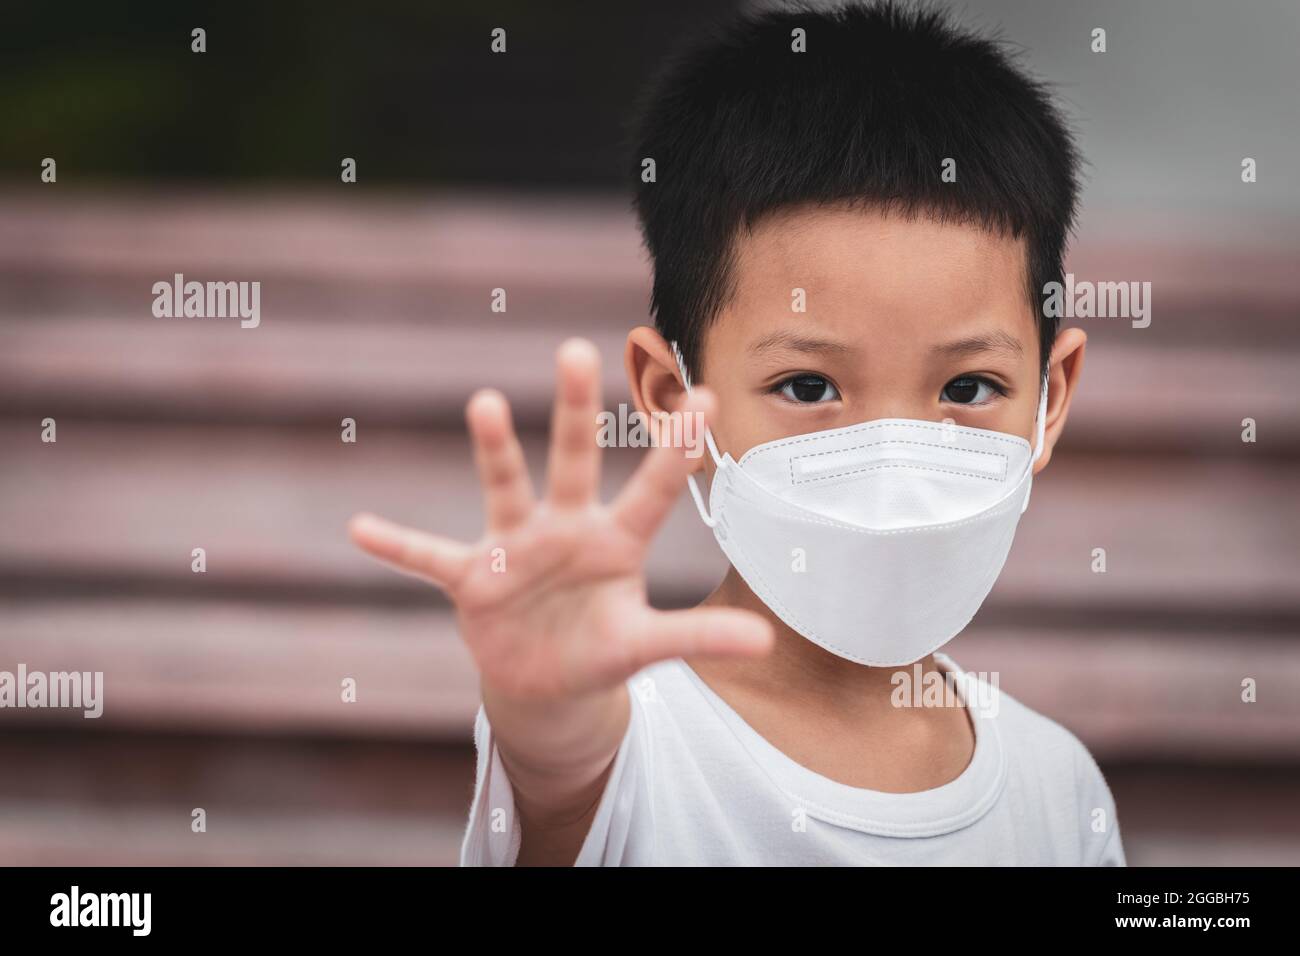 Asian little child showing stop his hand. A kid wearing face mask. Domestic Family violence concept. stop sign. focus face. Stock Photo